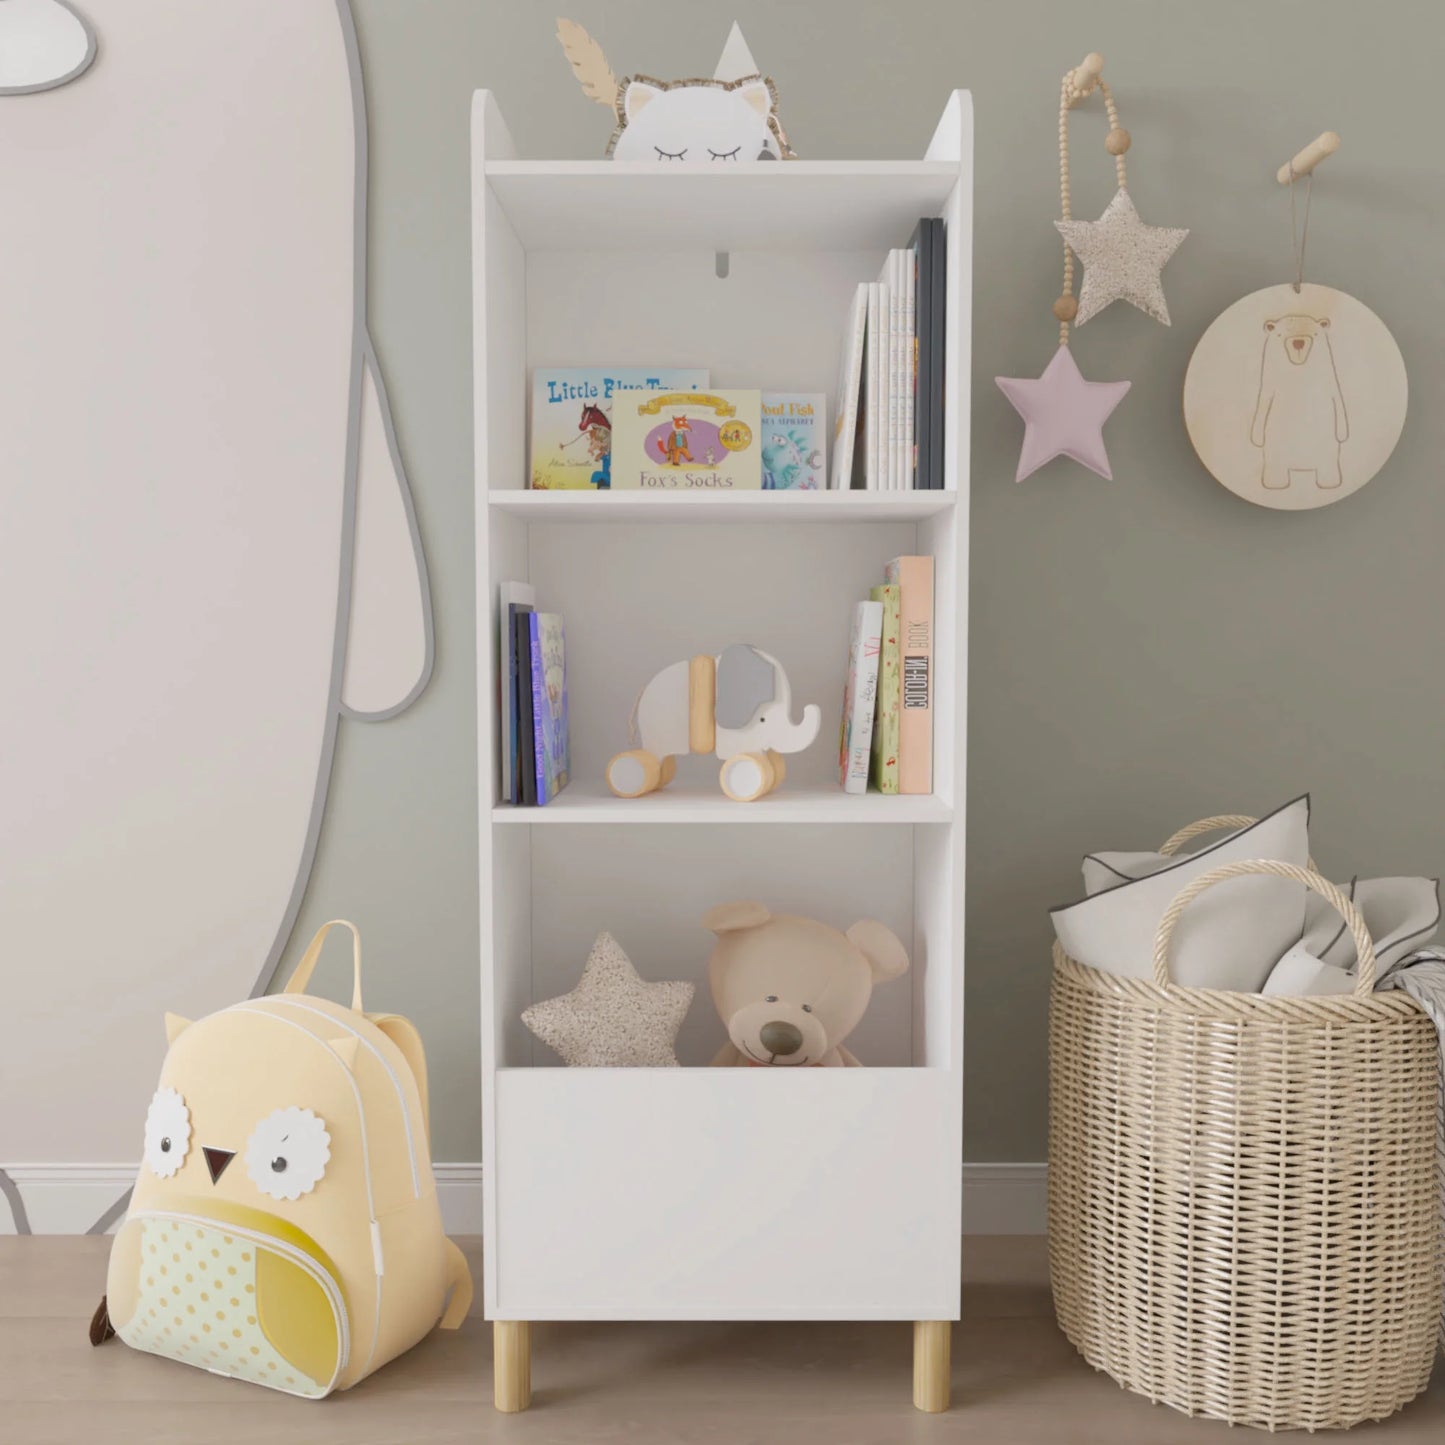 Smart FENDEE Wooden Kids Bookcase,Toy Box for Kids Room